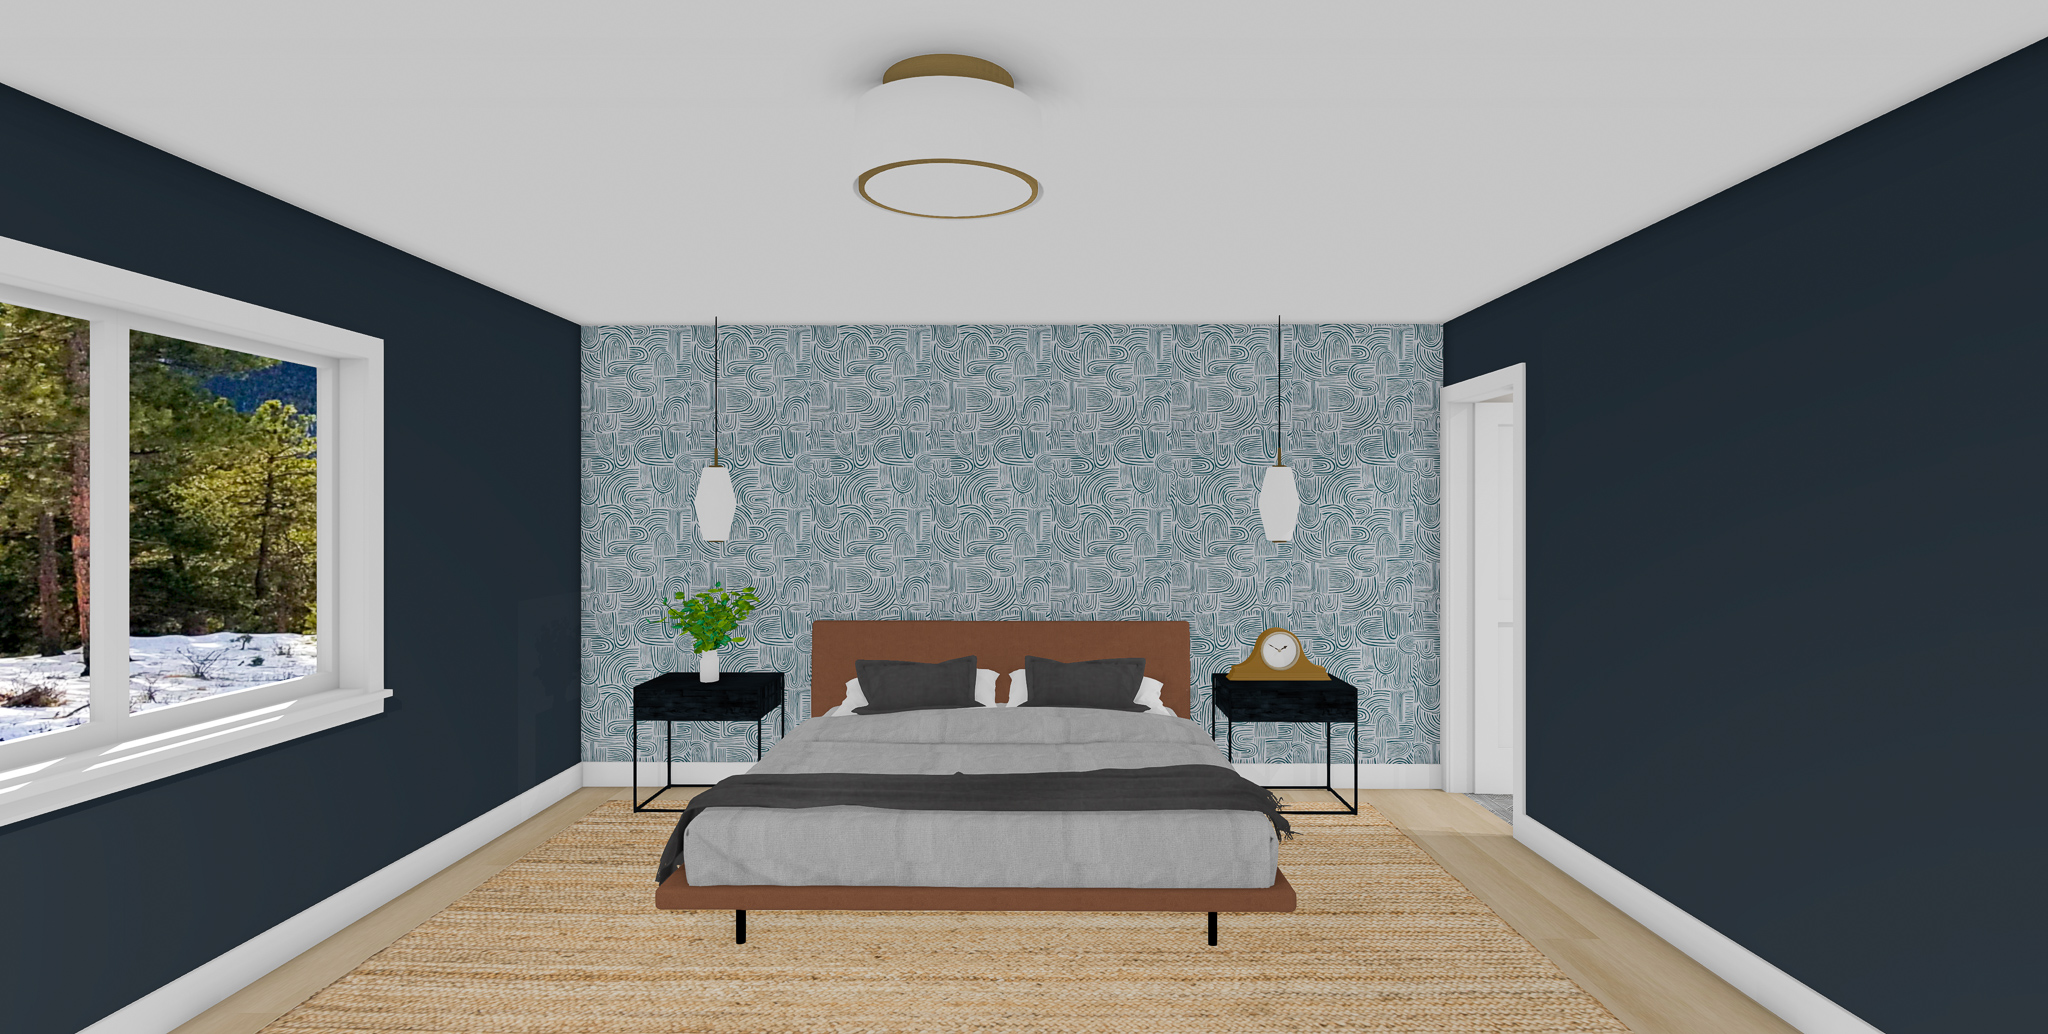 7 Best Spaces and Places for Wallpaper - construction2style